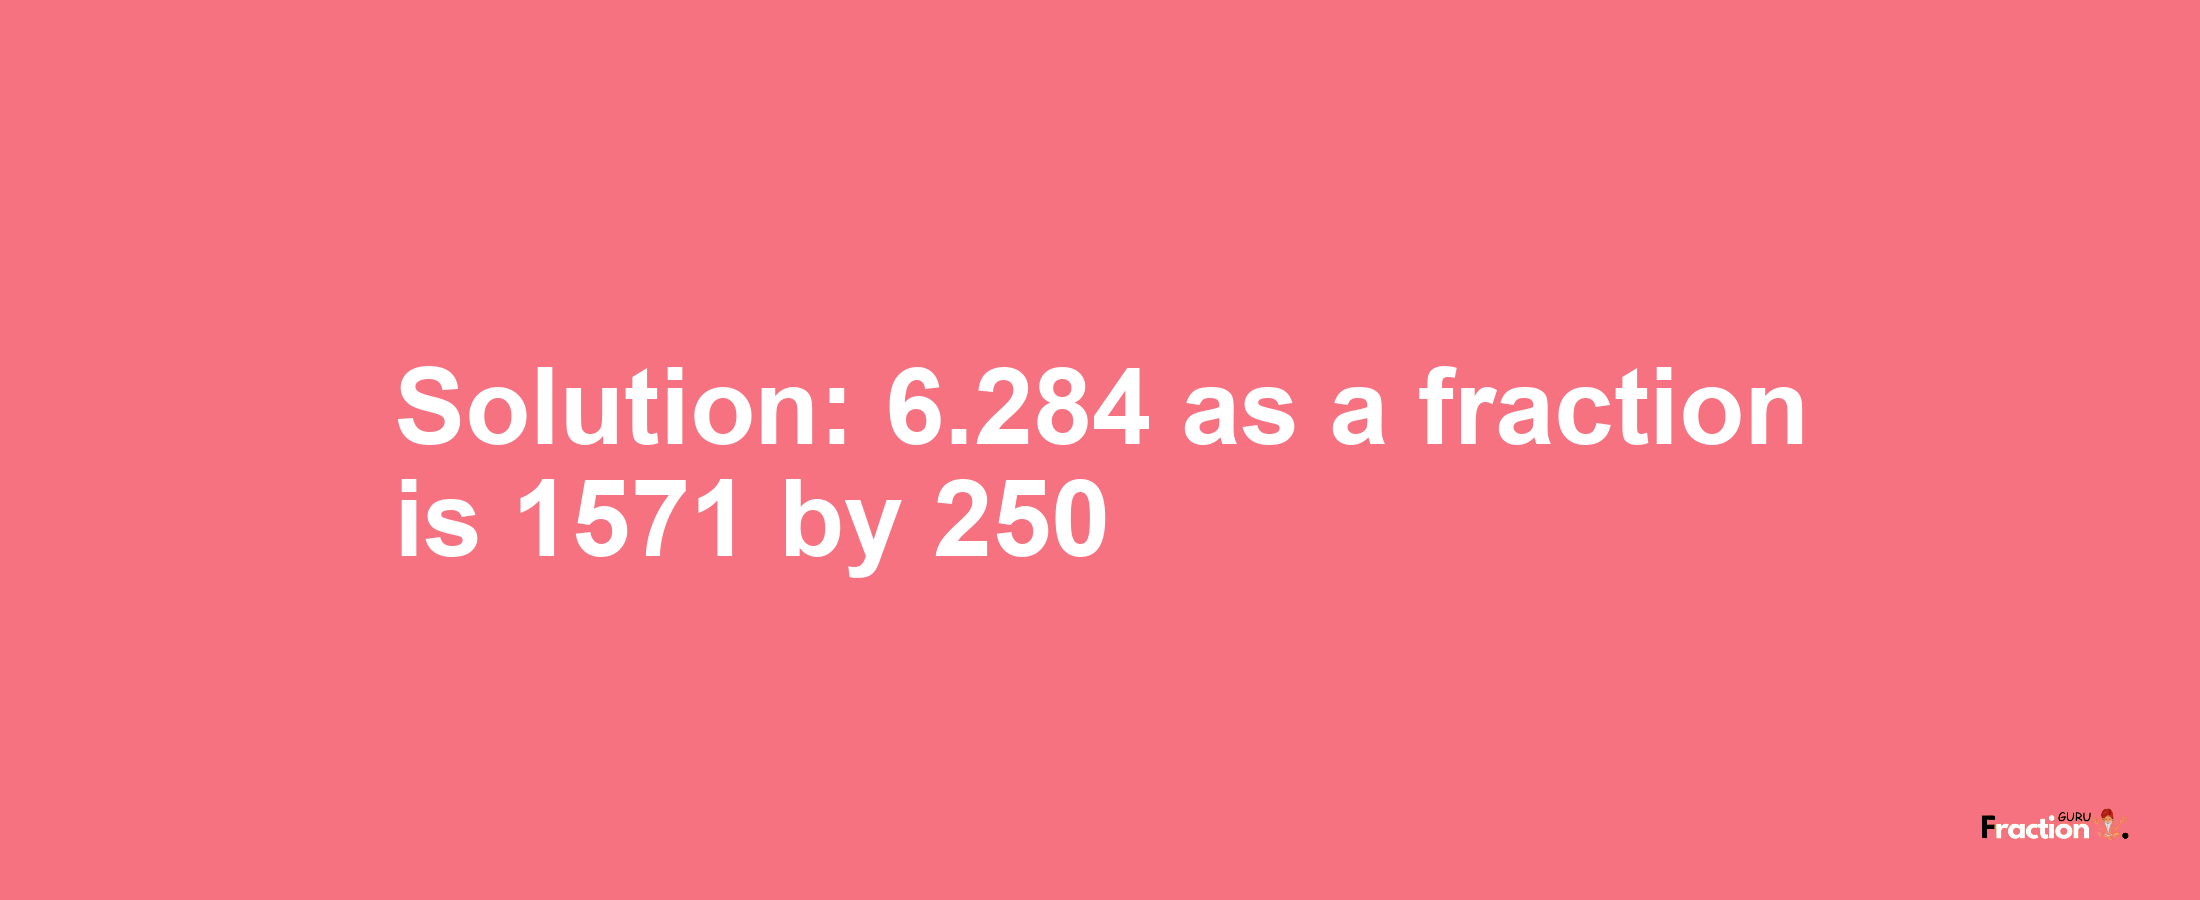 Solution:6.284 as a fraction is 1571/250